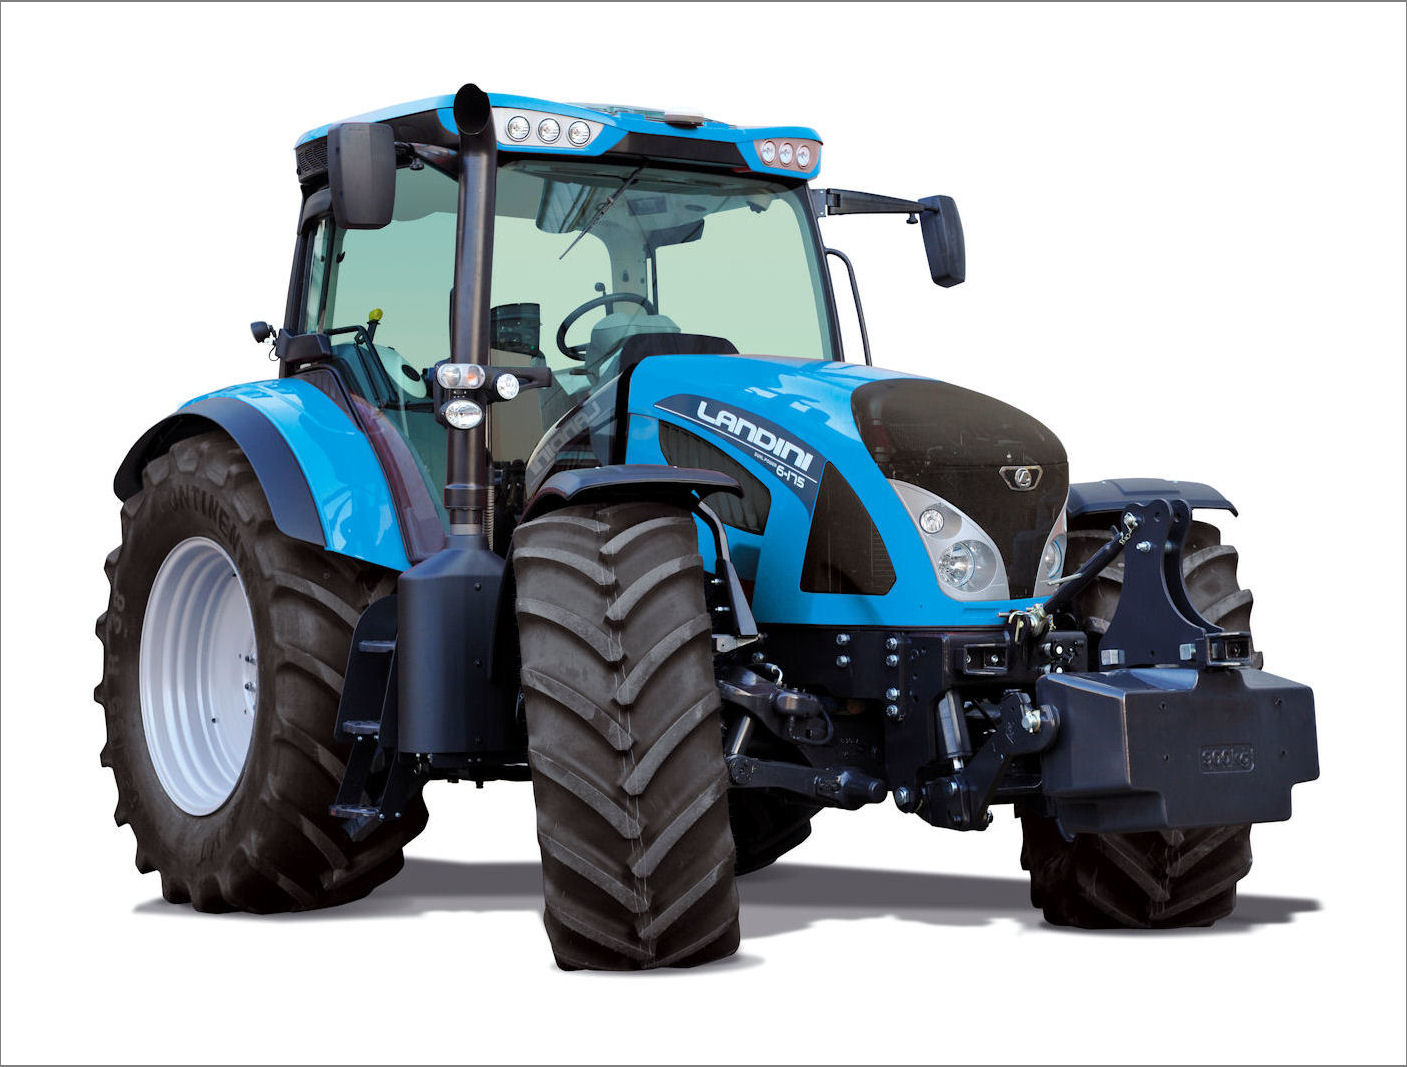 High-spec features abound on the new Landini 6 Series tractors, including fingertip seat-mounted controls for most functions in the well-appointed Lounge cab.